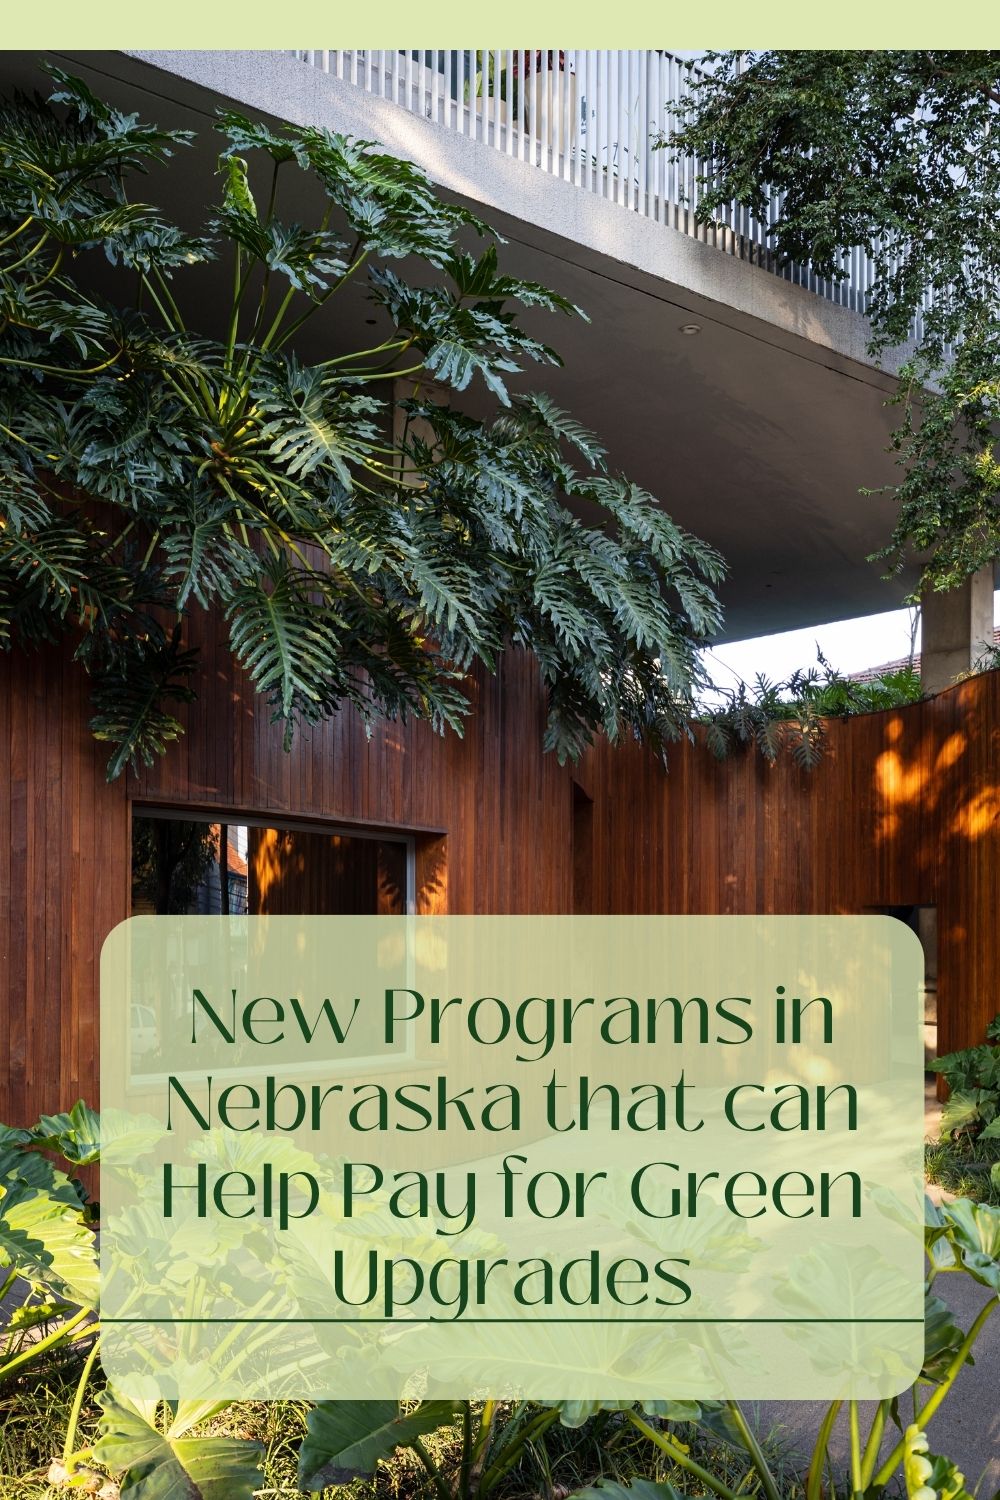 New Programs in Nebraska that can Help Pay for Green Upgrades